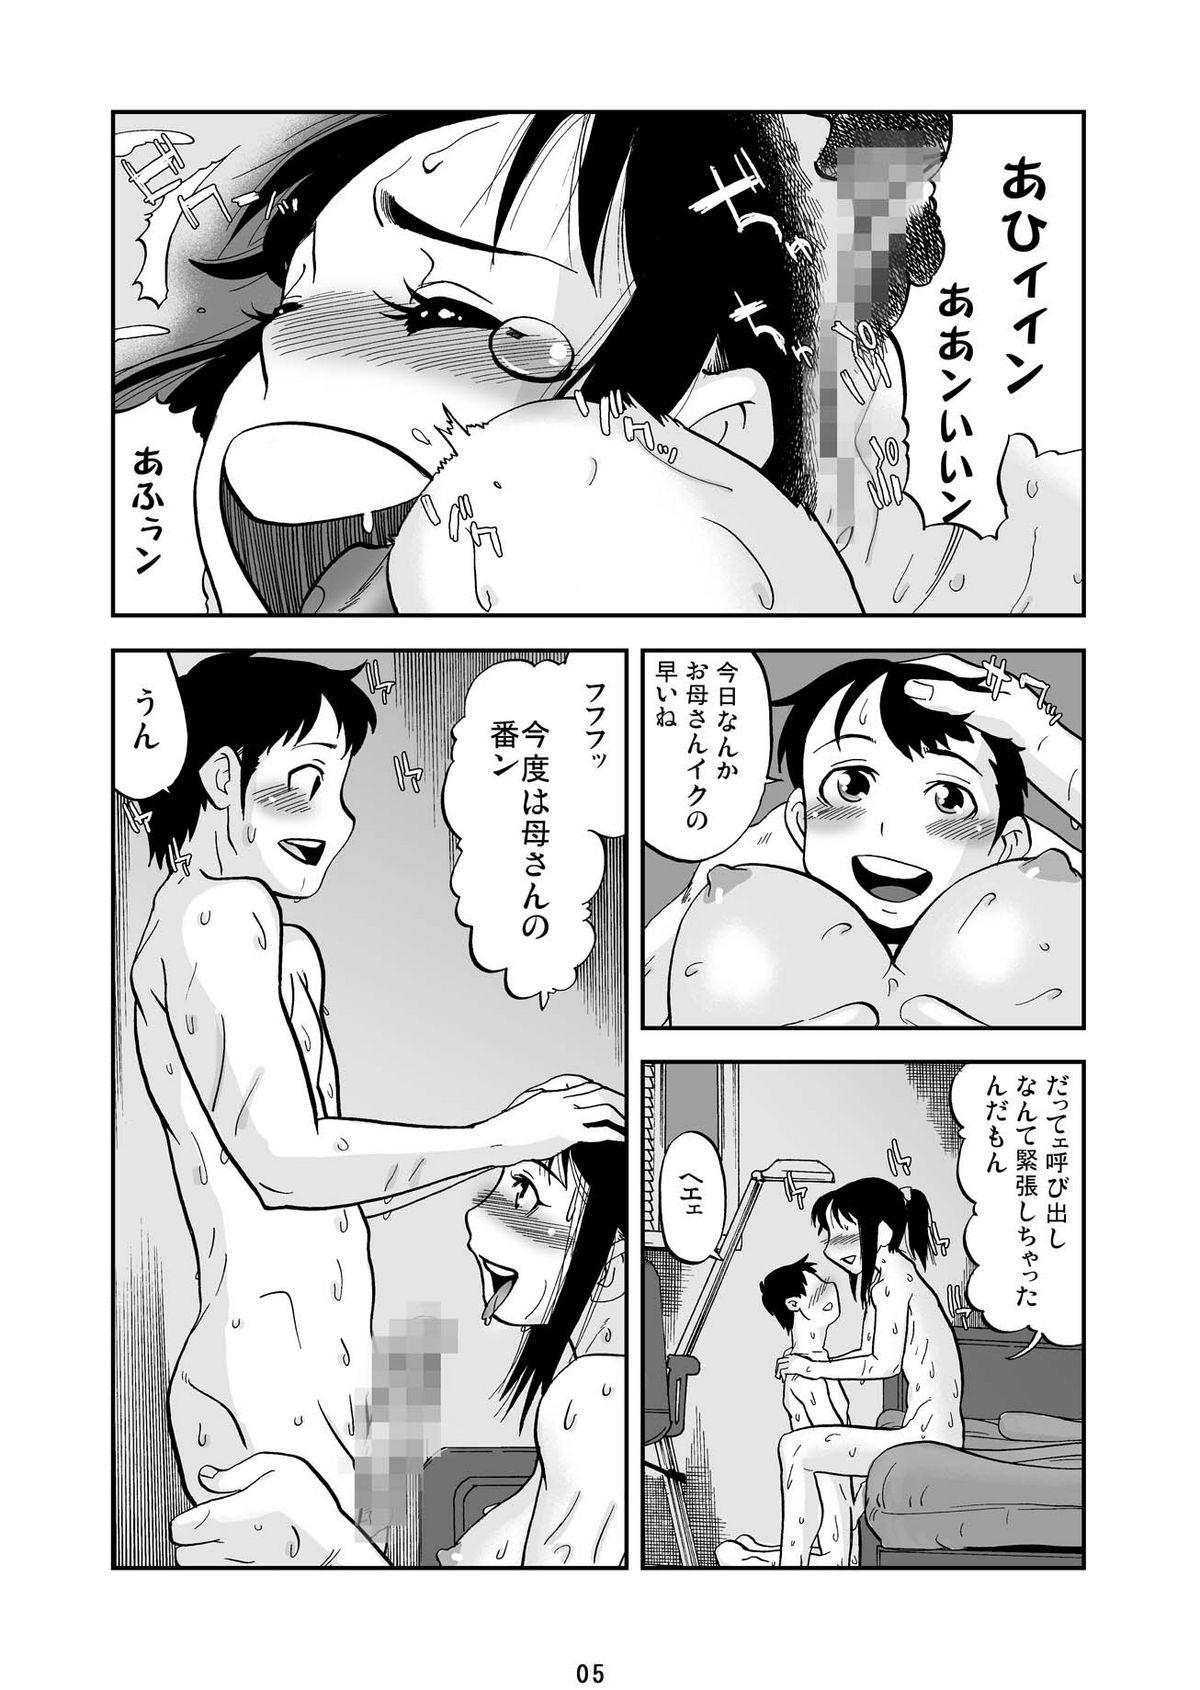 Skinny 母子禁 VOL.01 Sex Party - Page 6